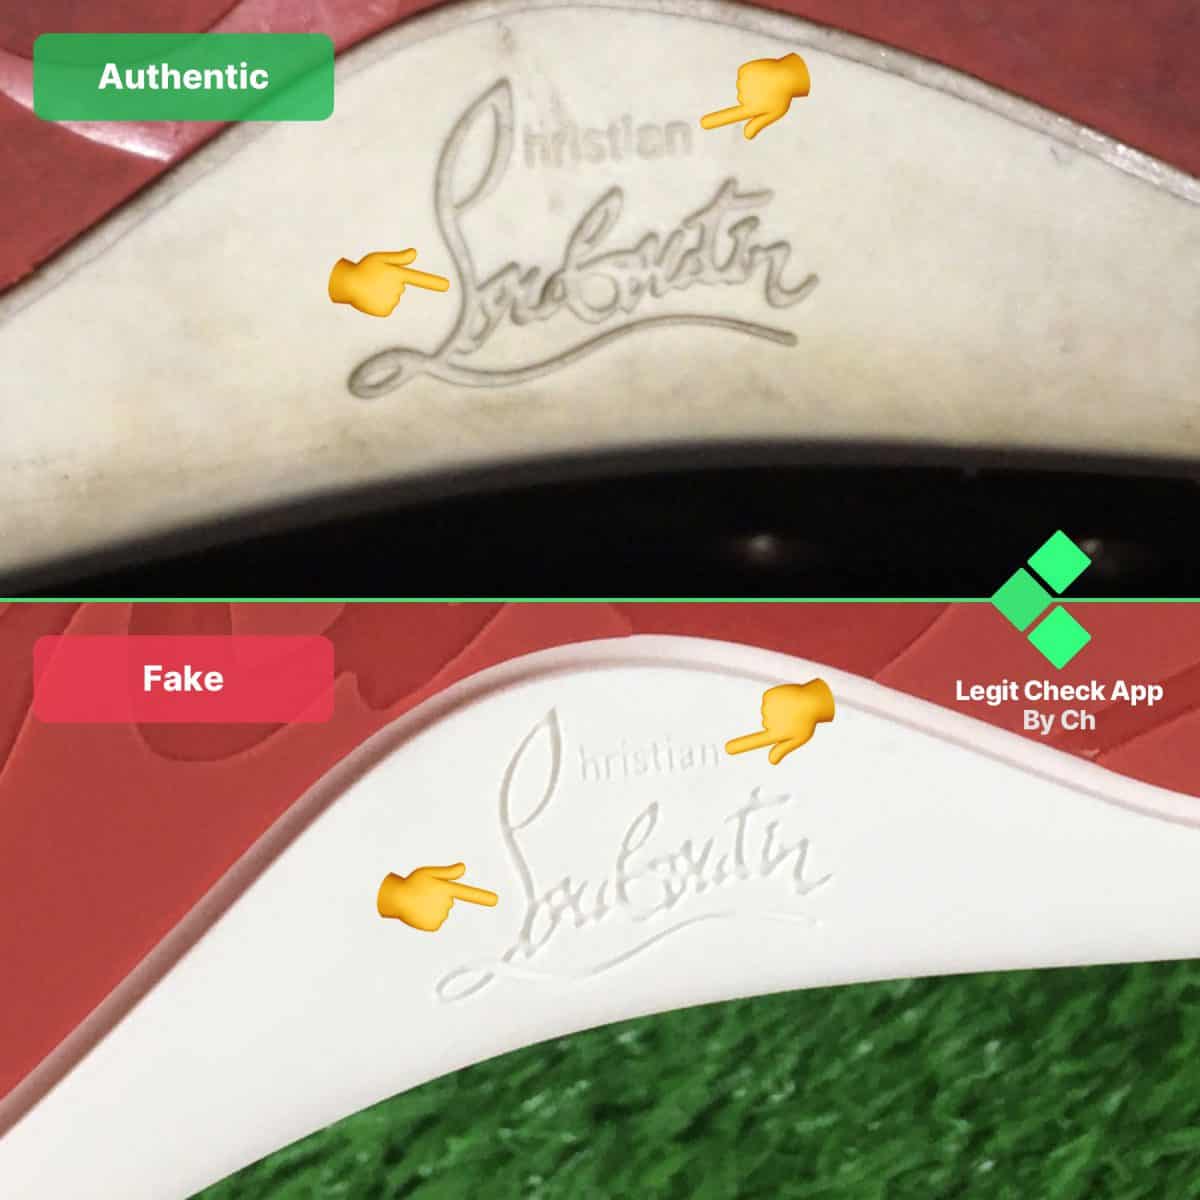 How To Spot Fake Louboutin High Shoes Fake Vs Real High - Legit Check By Ch